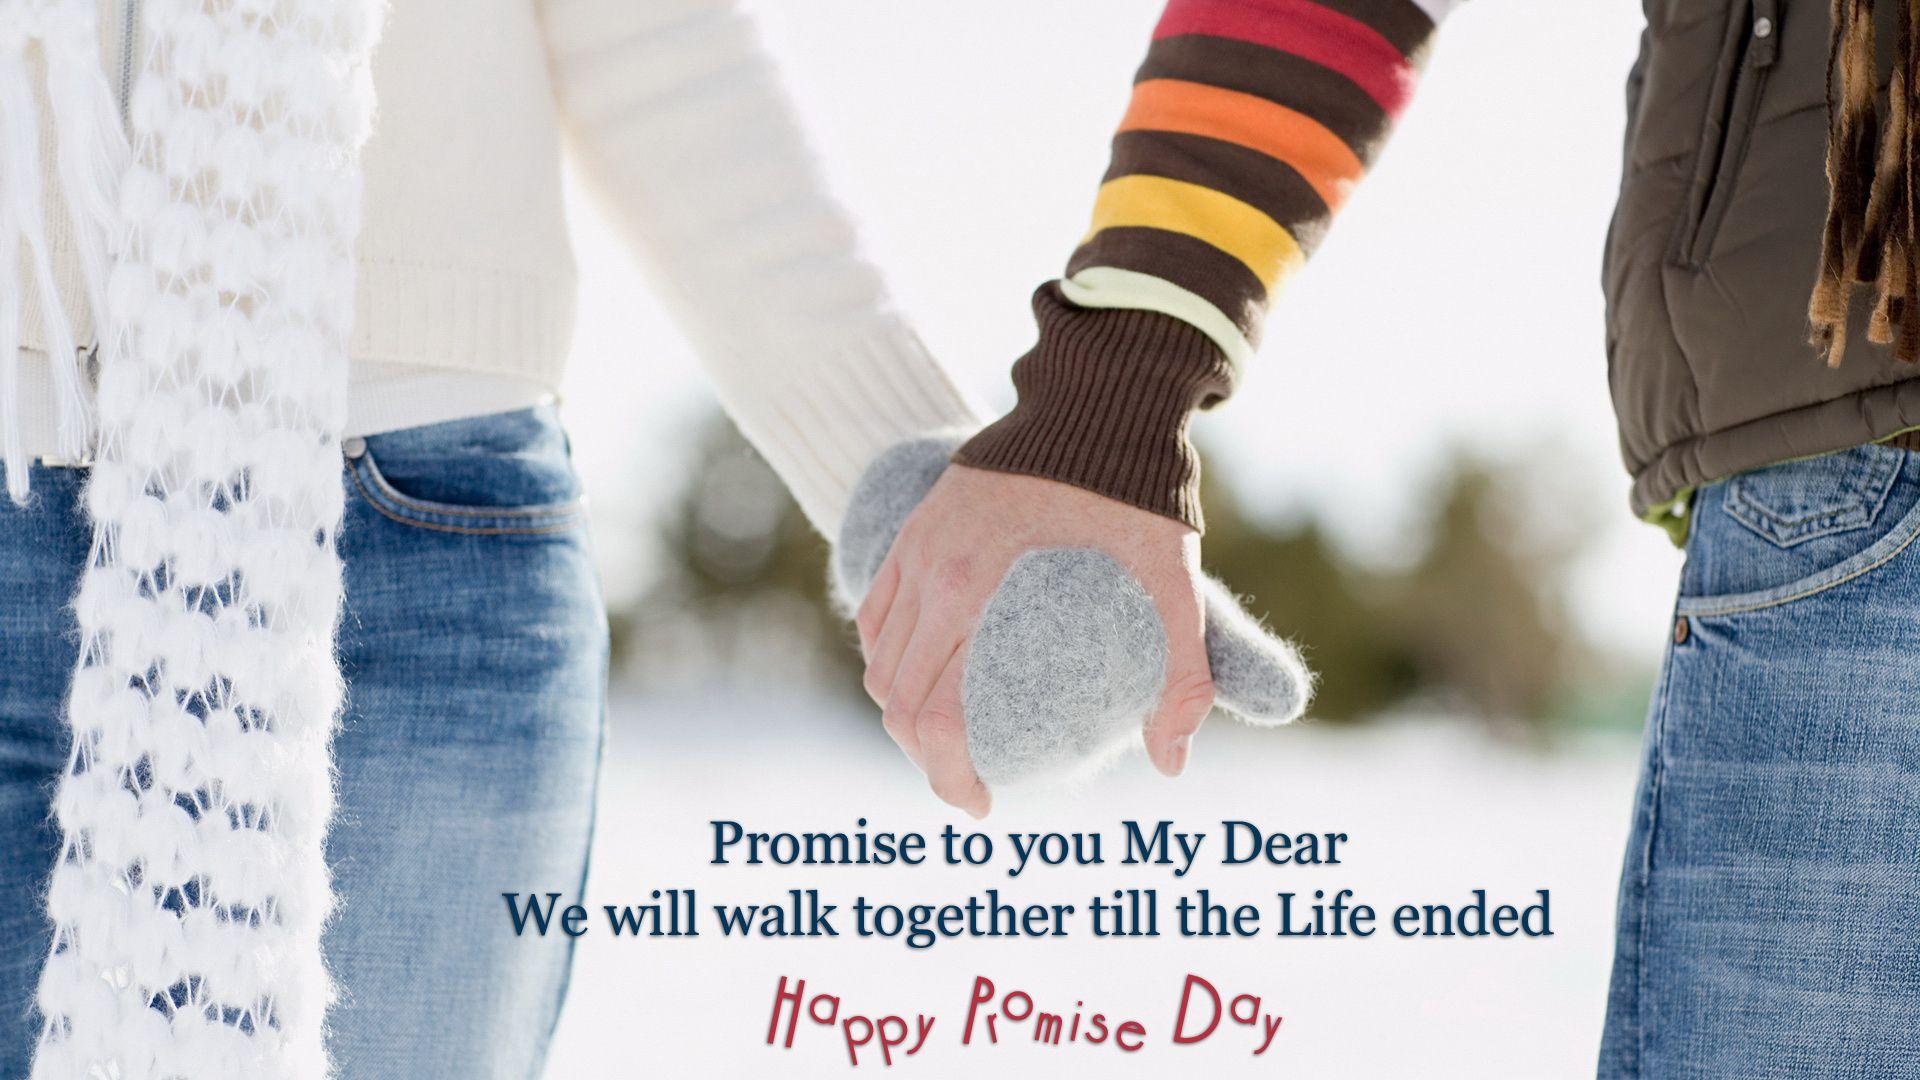 happy promise day 2023 wishes status images messages quotes shayari photos  heart touching love promise for love husband wife valentine 11 feb tvi   Happy Promise Day 2023 Wishes सथ अपन छटग